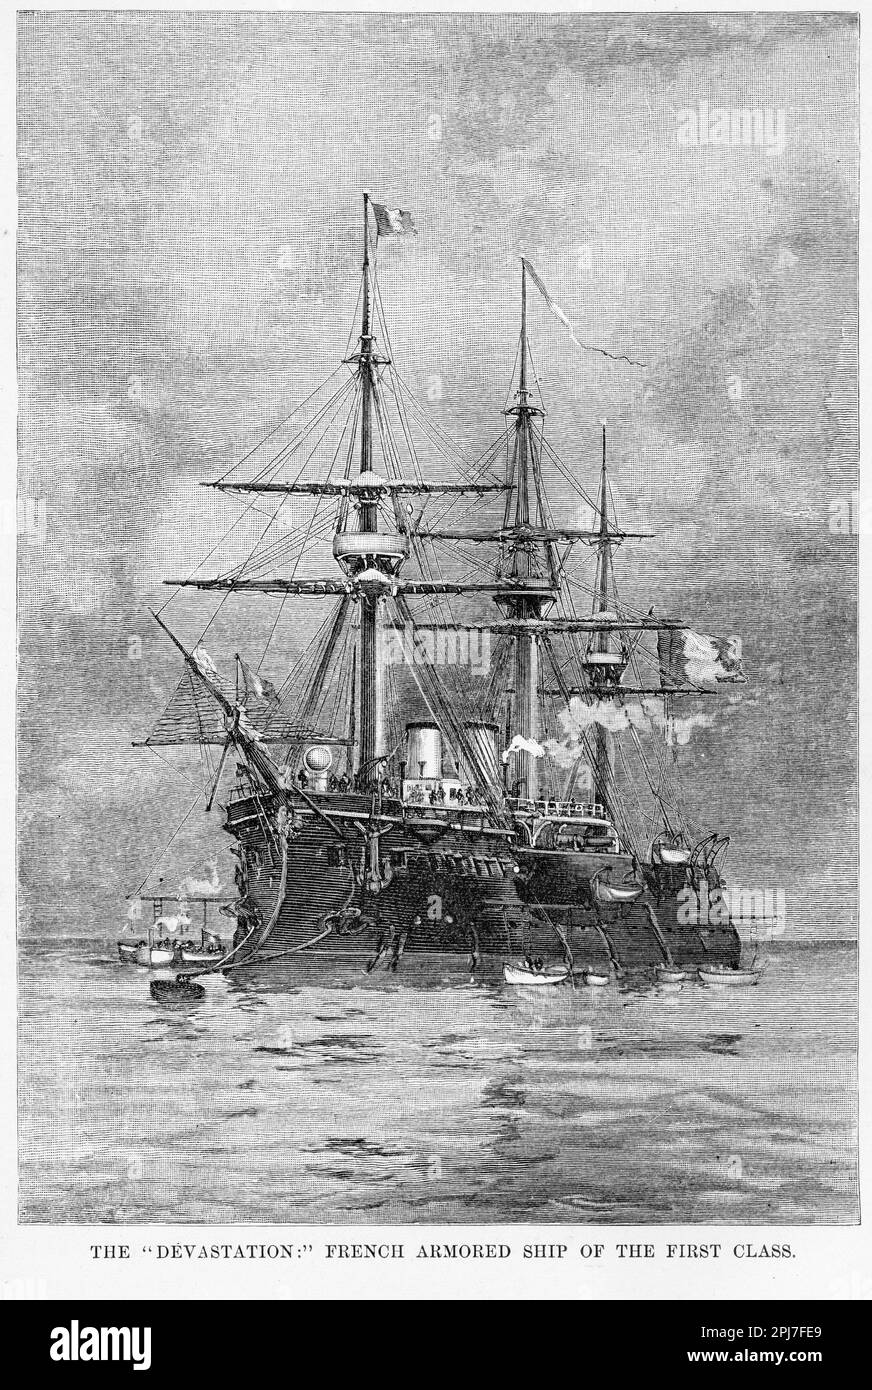 The Dévastation was launched in 1879 as an Dévastation-class ironclad battleship of the French Navy of central battery (casemate) design. She was used as a school ship for manoeuvres. Stock Photo